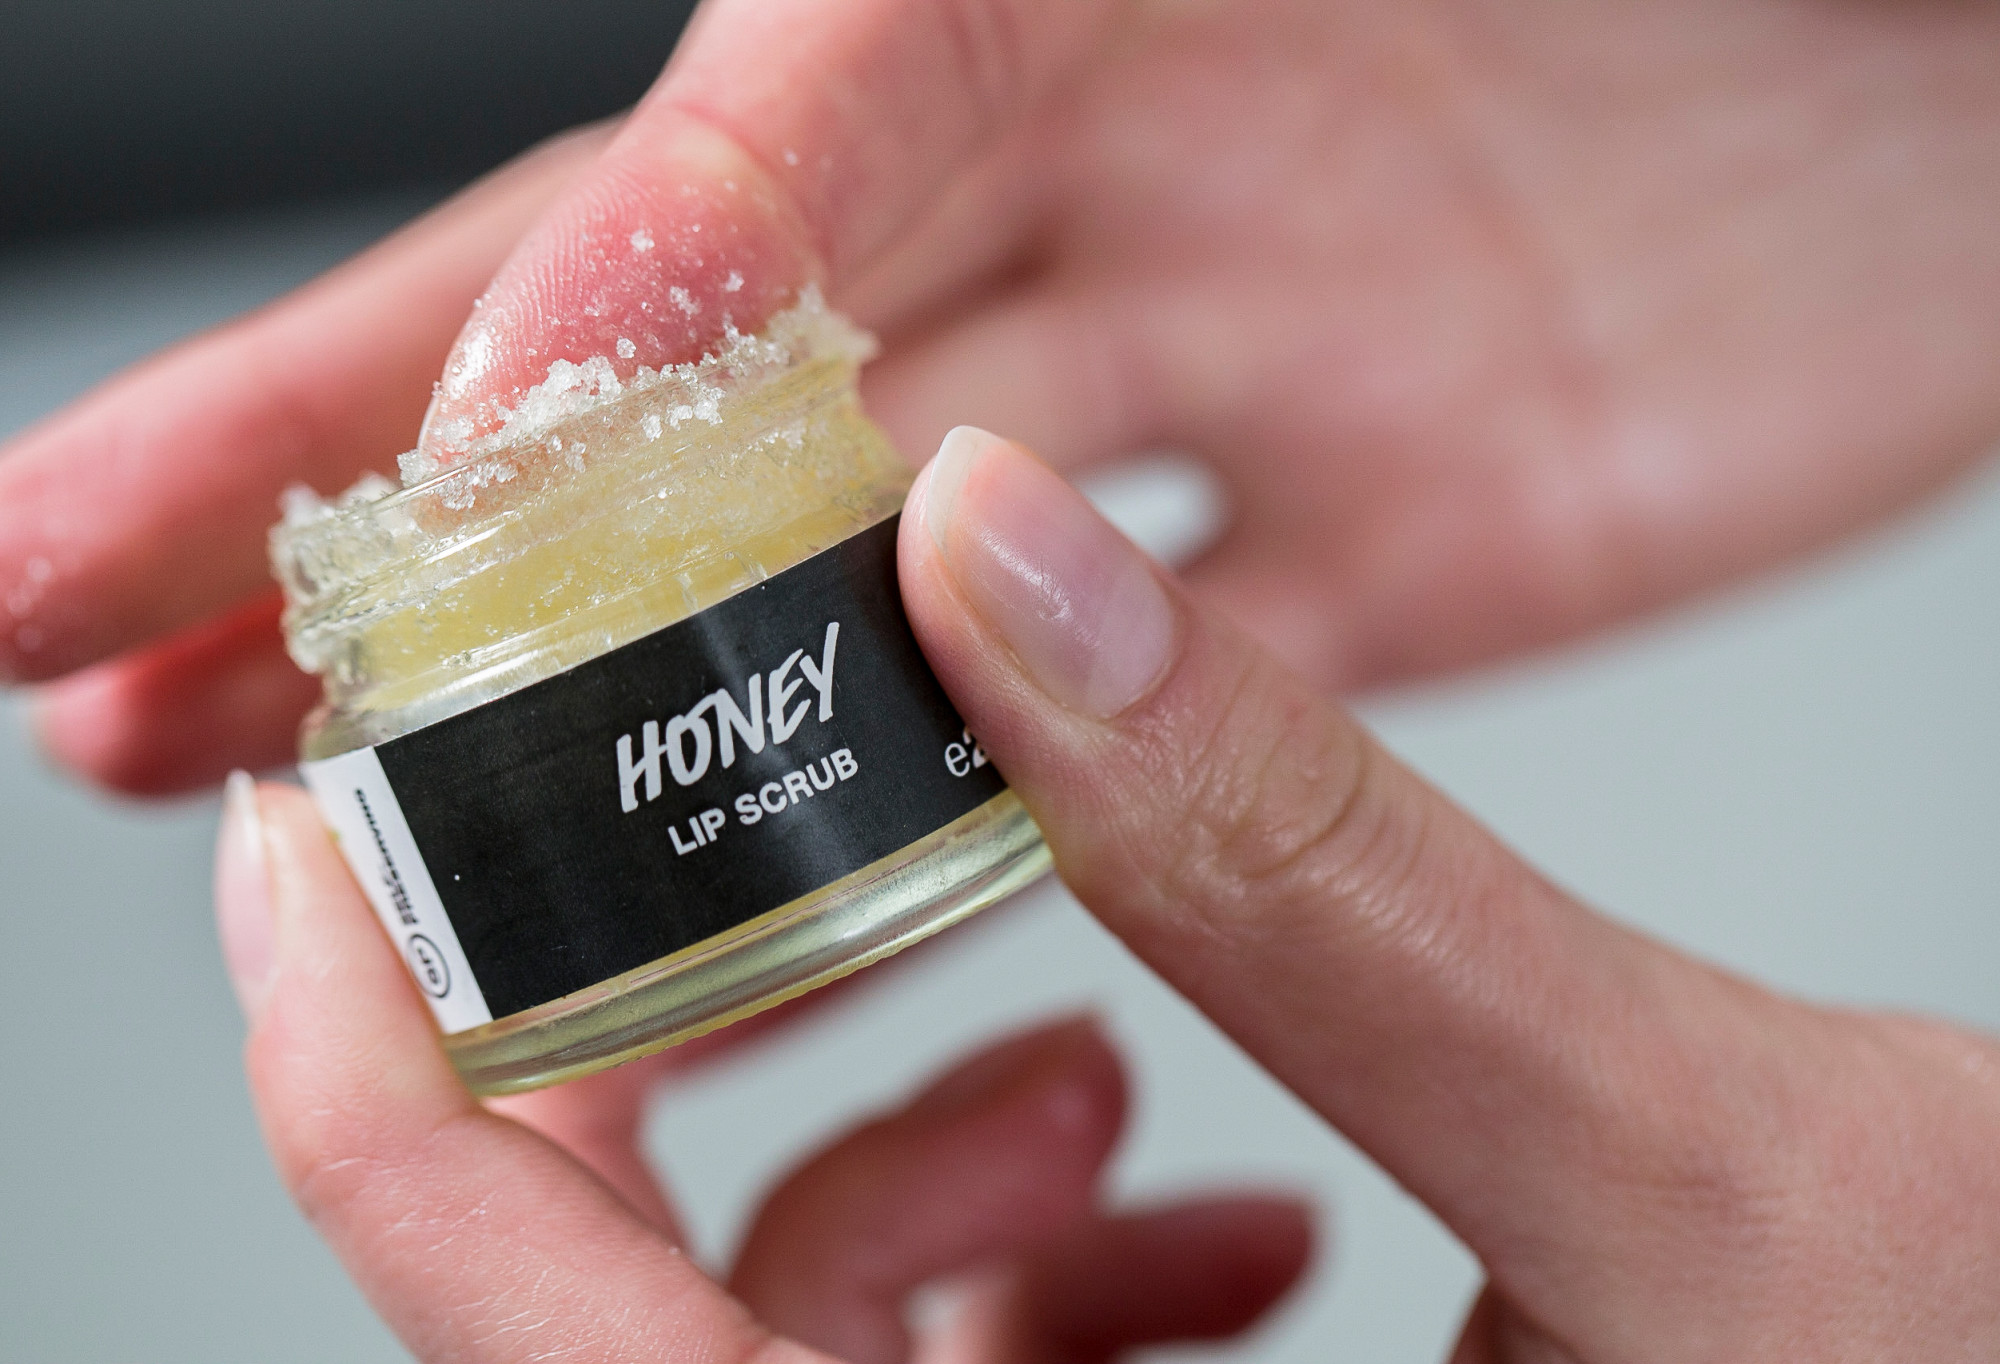 Honey, a light golden sugar lip scrub. is scooped out of its glass pot with an index finger.